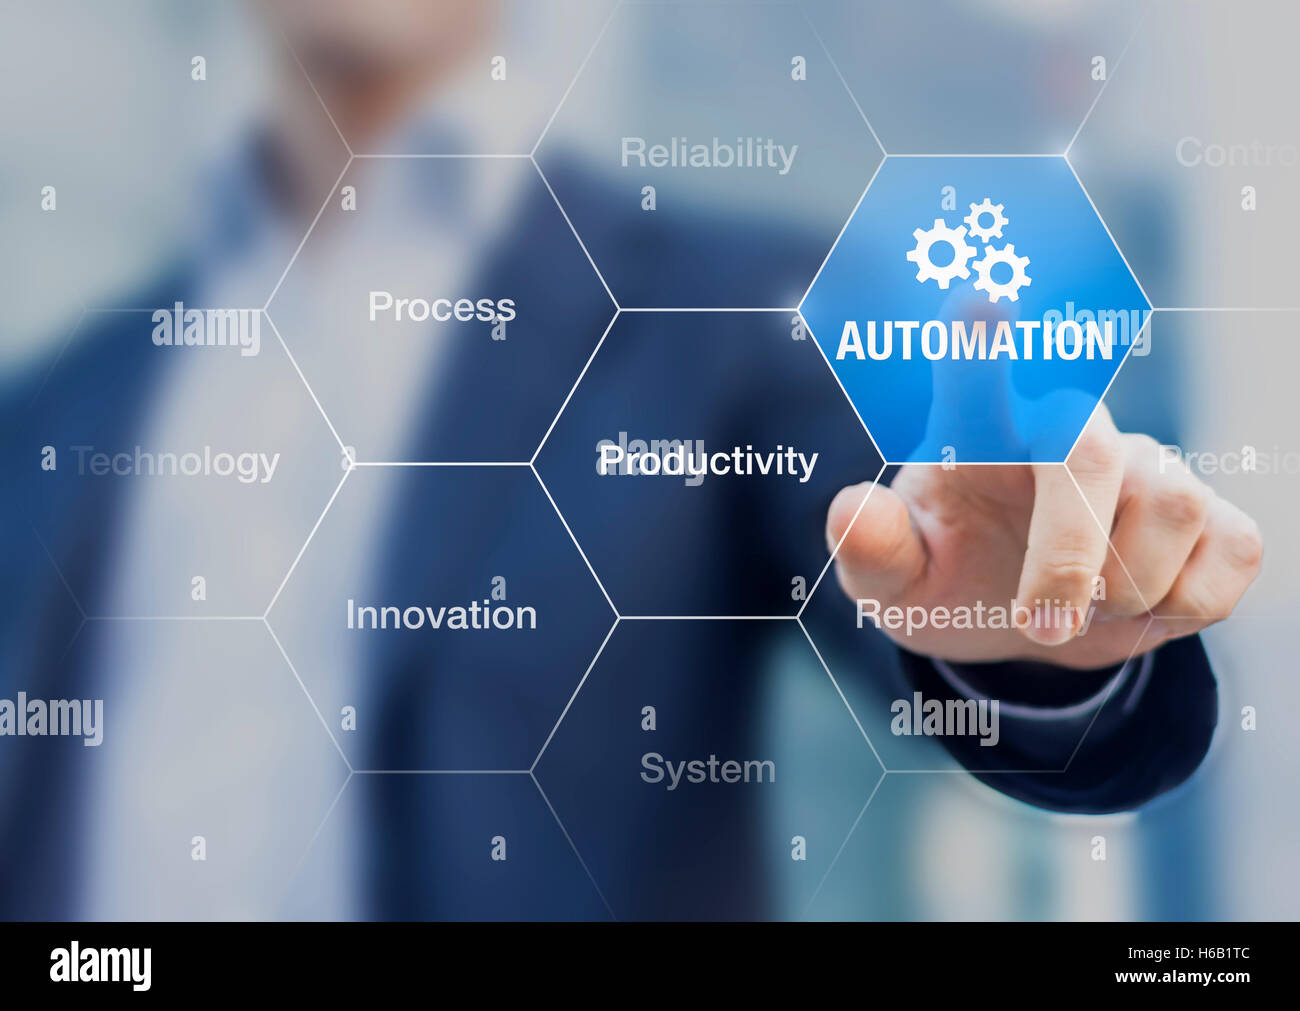 Presentation about automation as an innovation improving productivity, reliability and repeatability in systems or processes Stock Photo